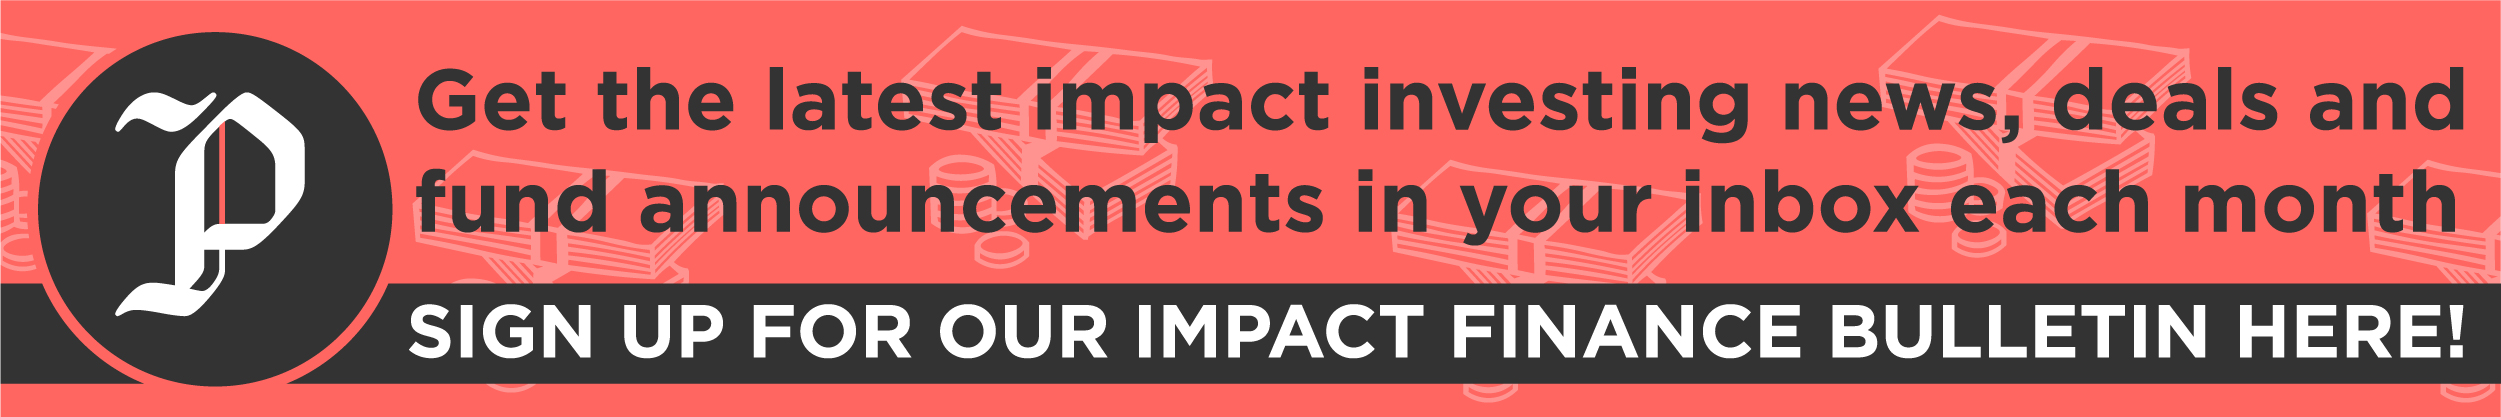 Banner advert - sign up for Impact Finance Newsflow